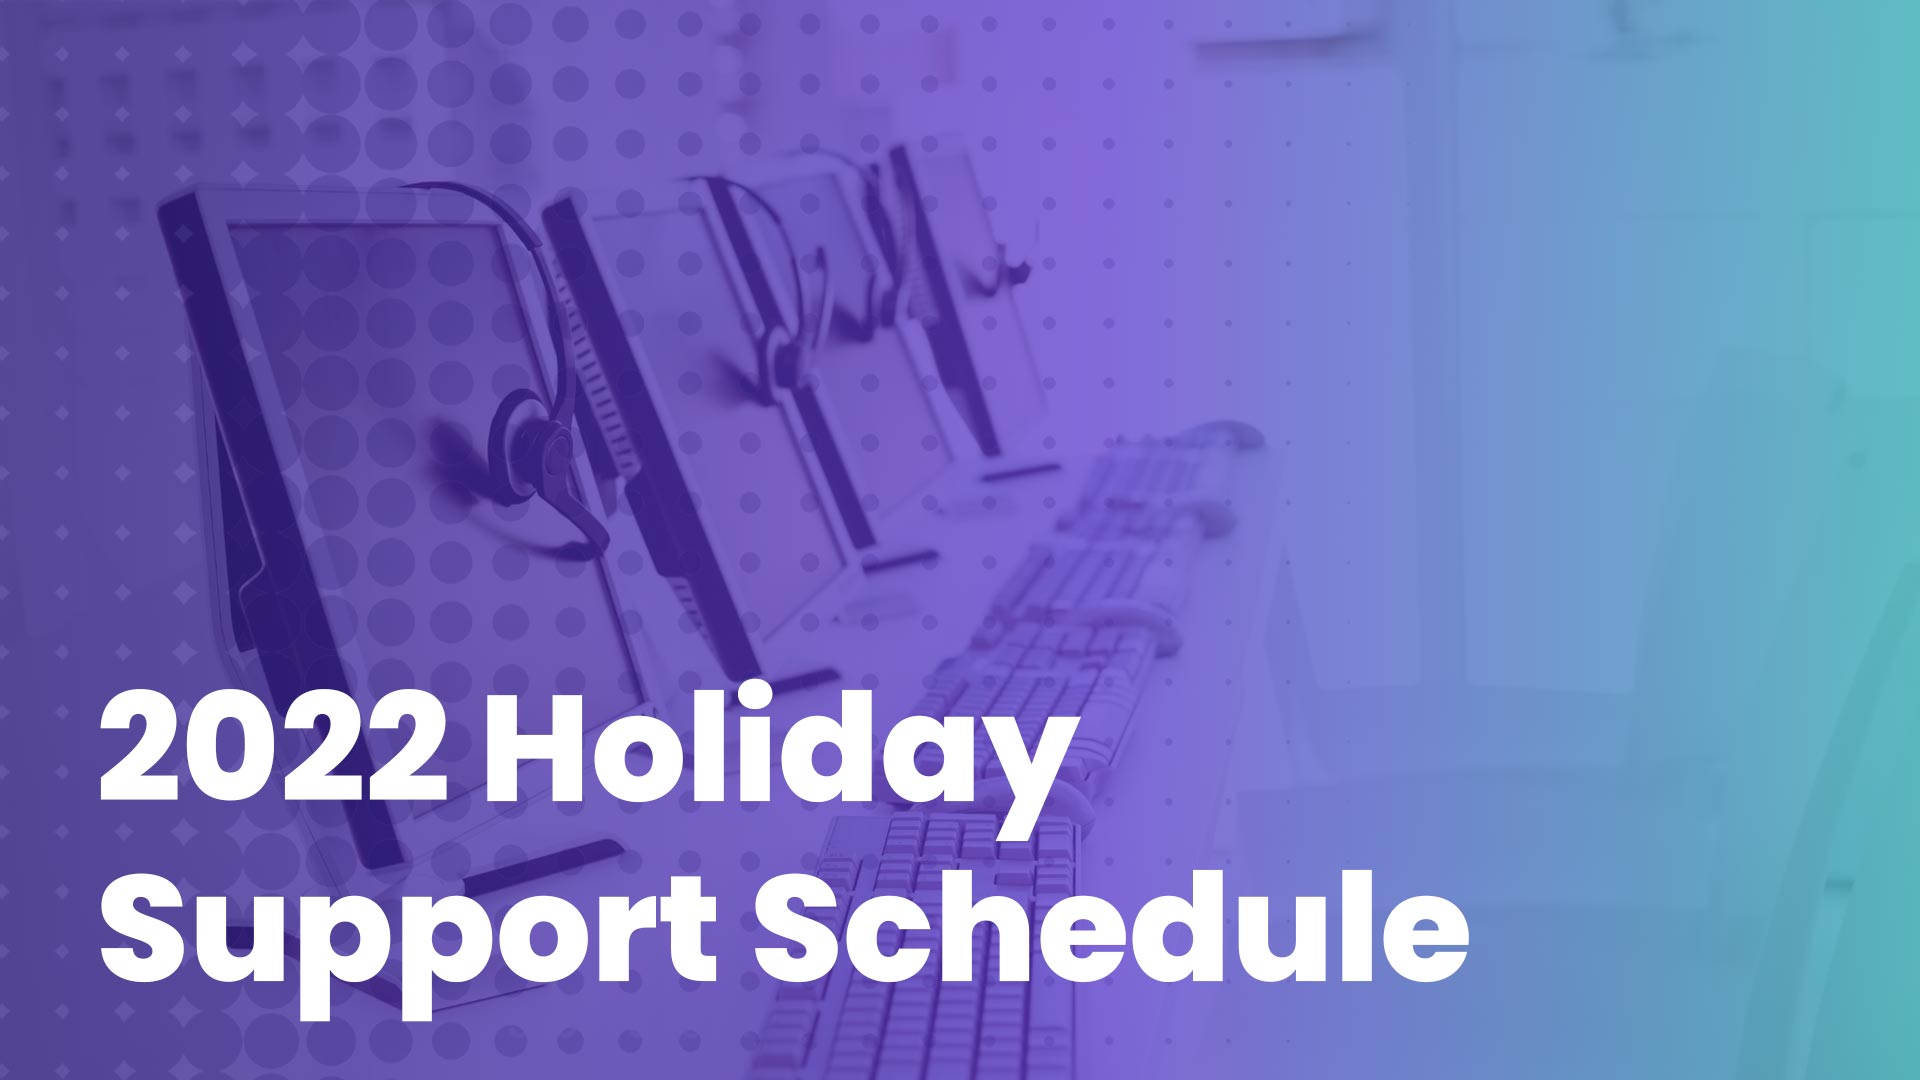 About Support Over the Upcoming 2022 Holidays